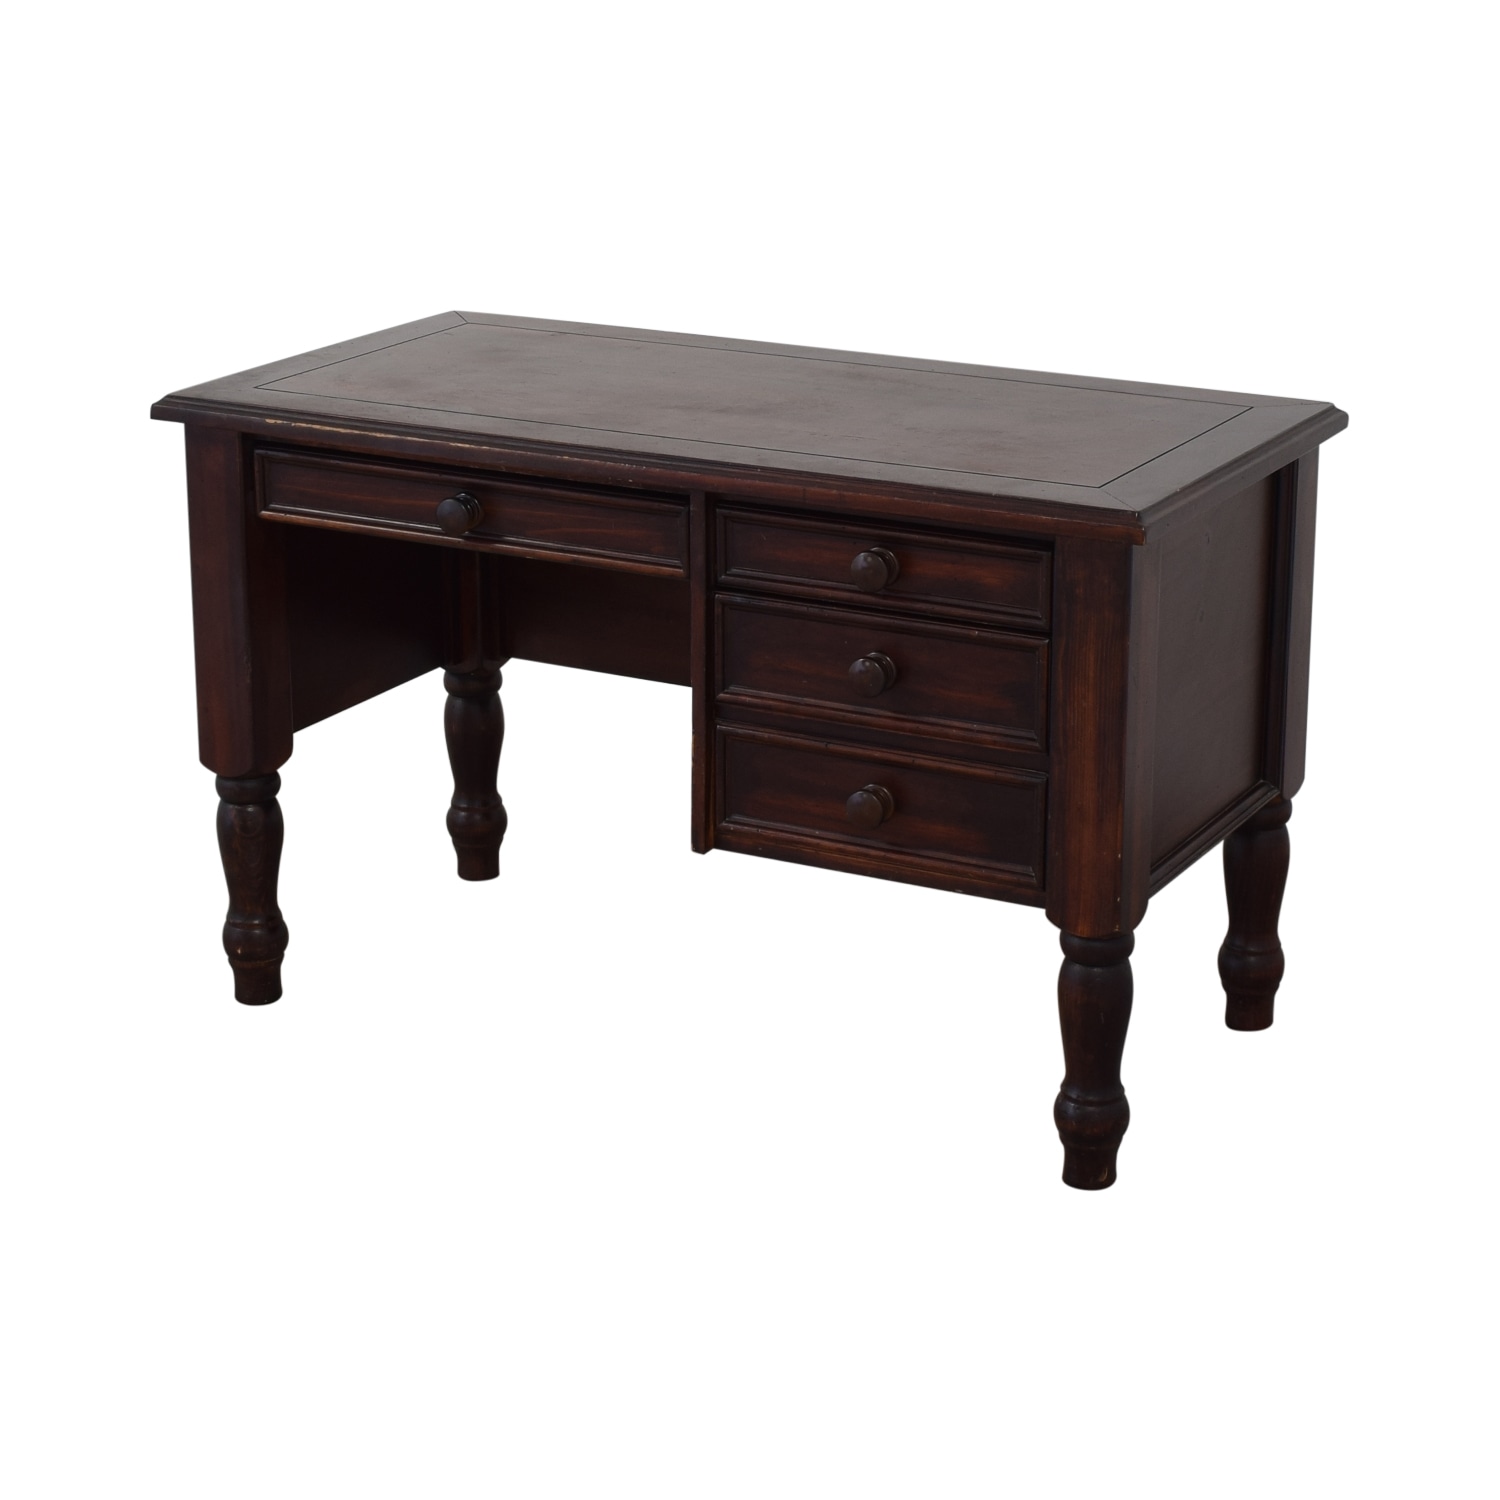 Pottery Barn Arts and Crafts Desk, 43% Off